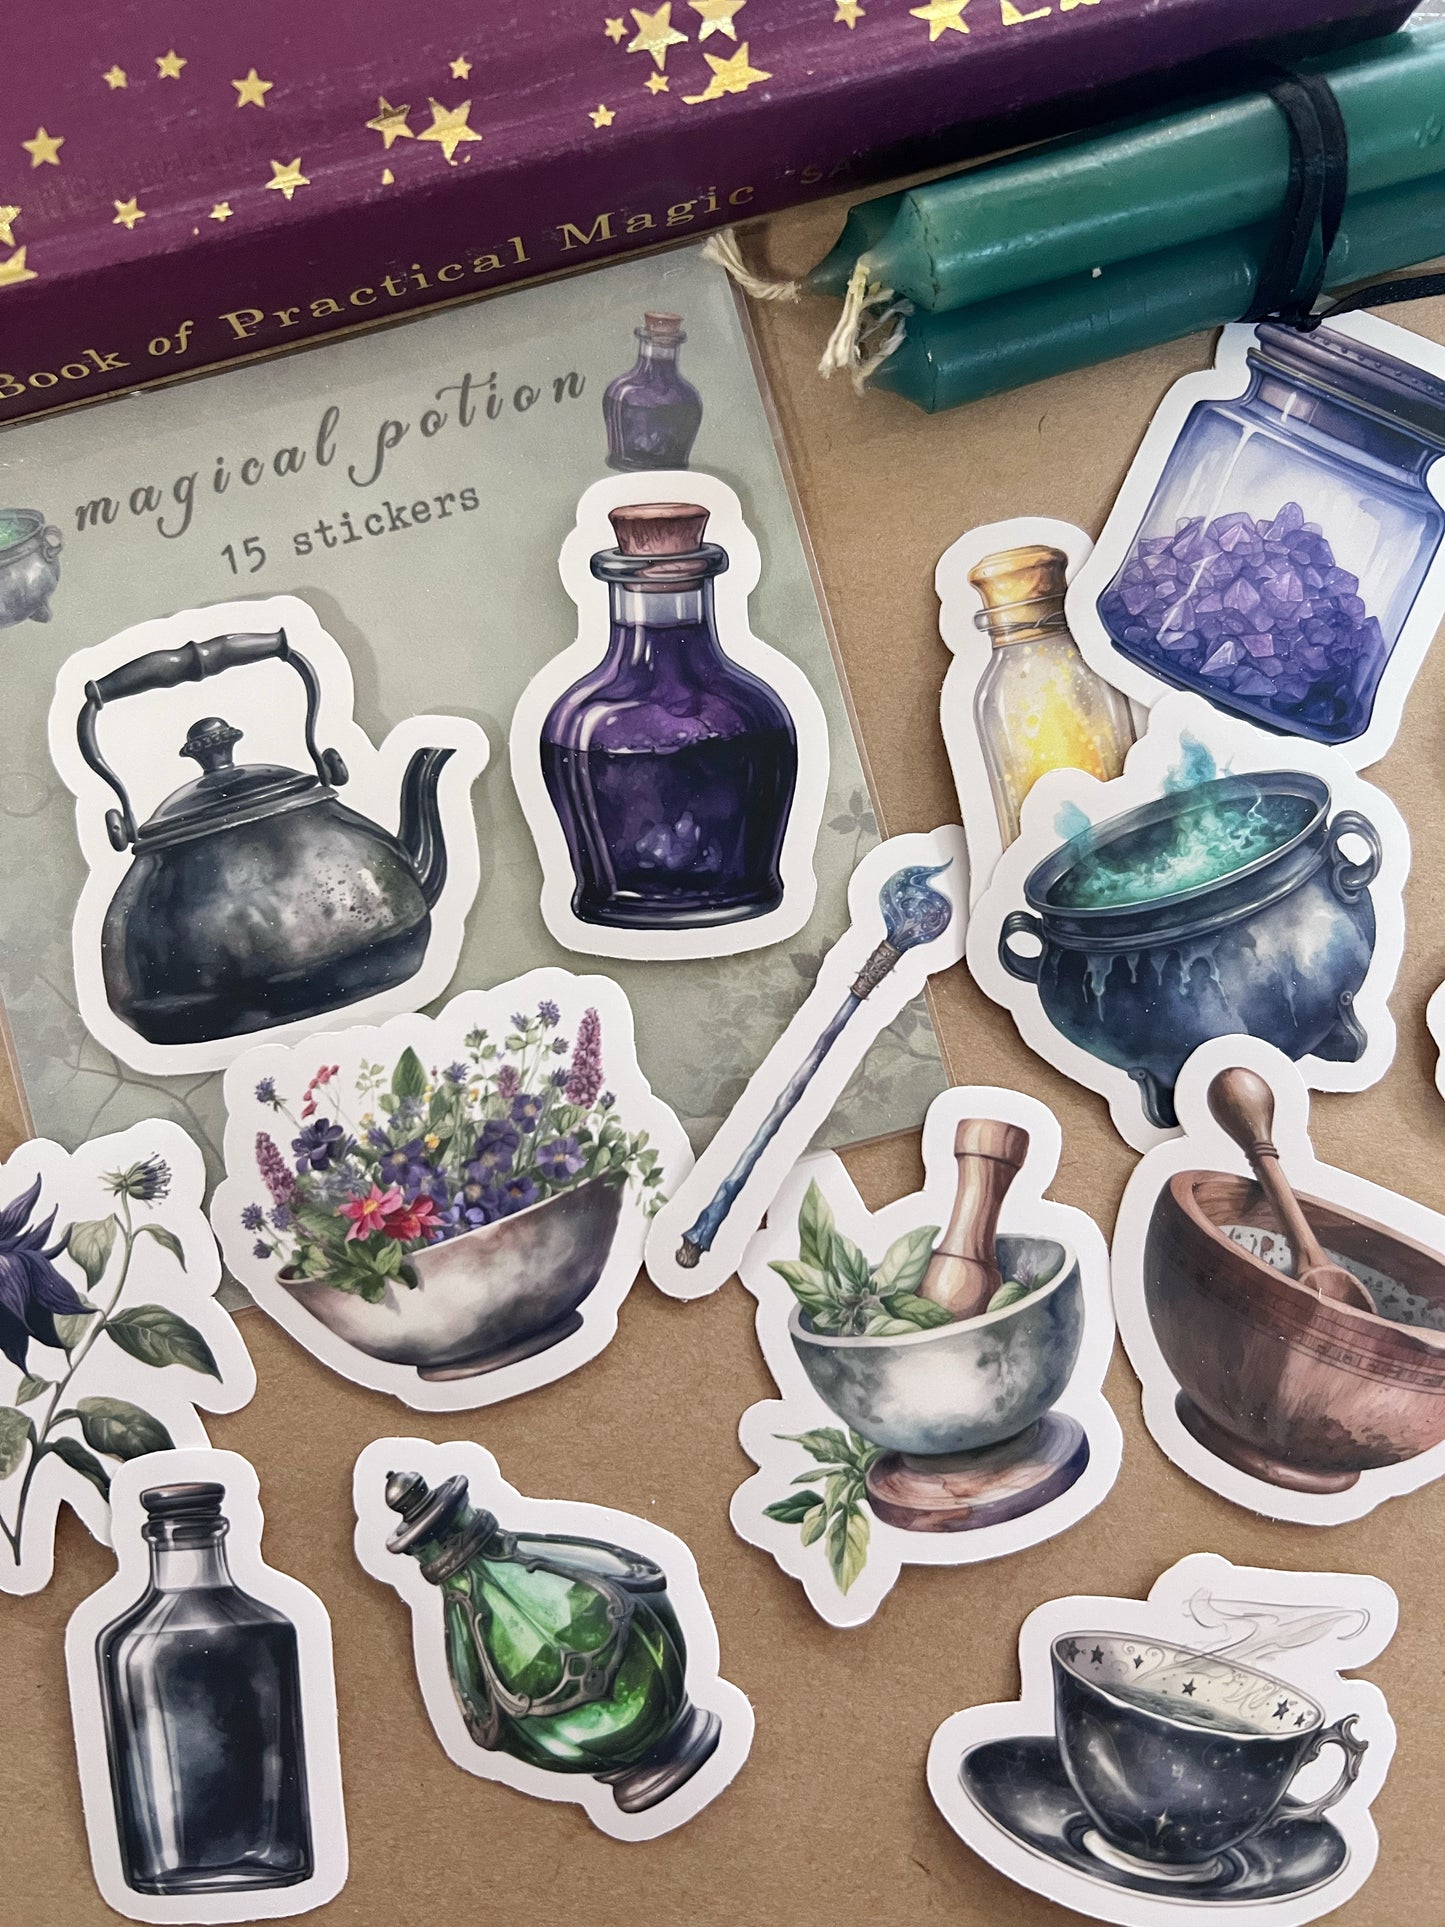 Magical Potion - 15 x stickers